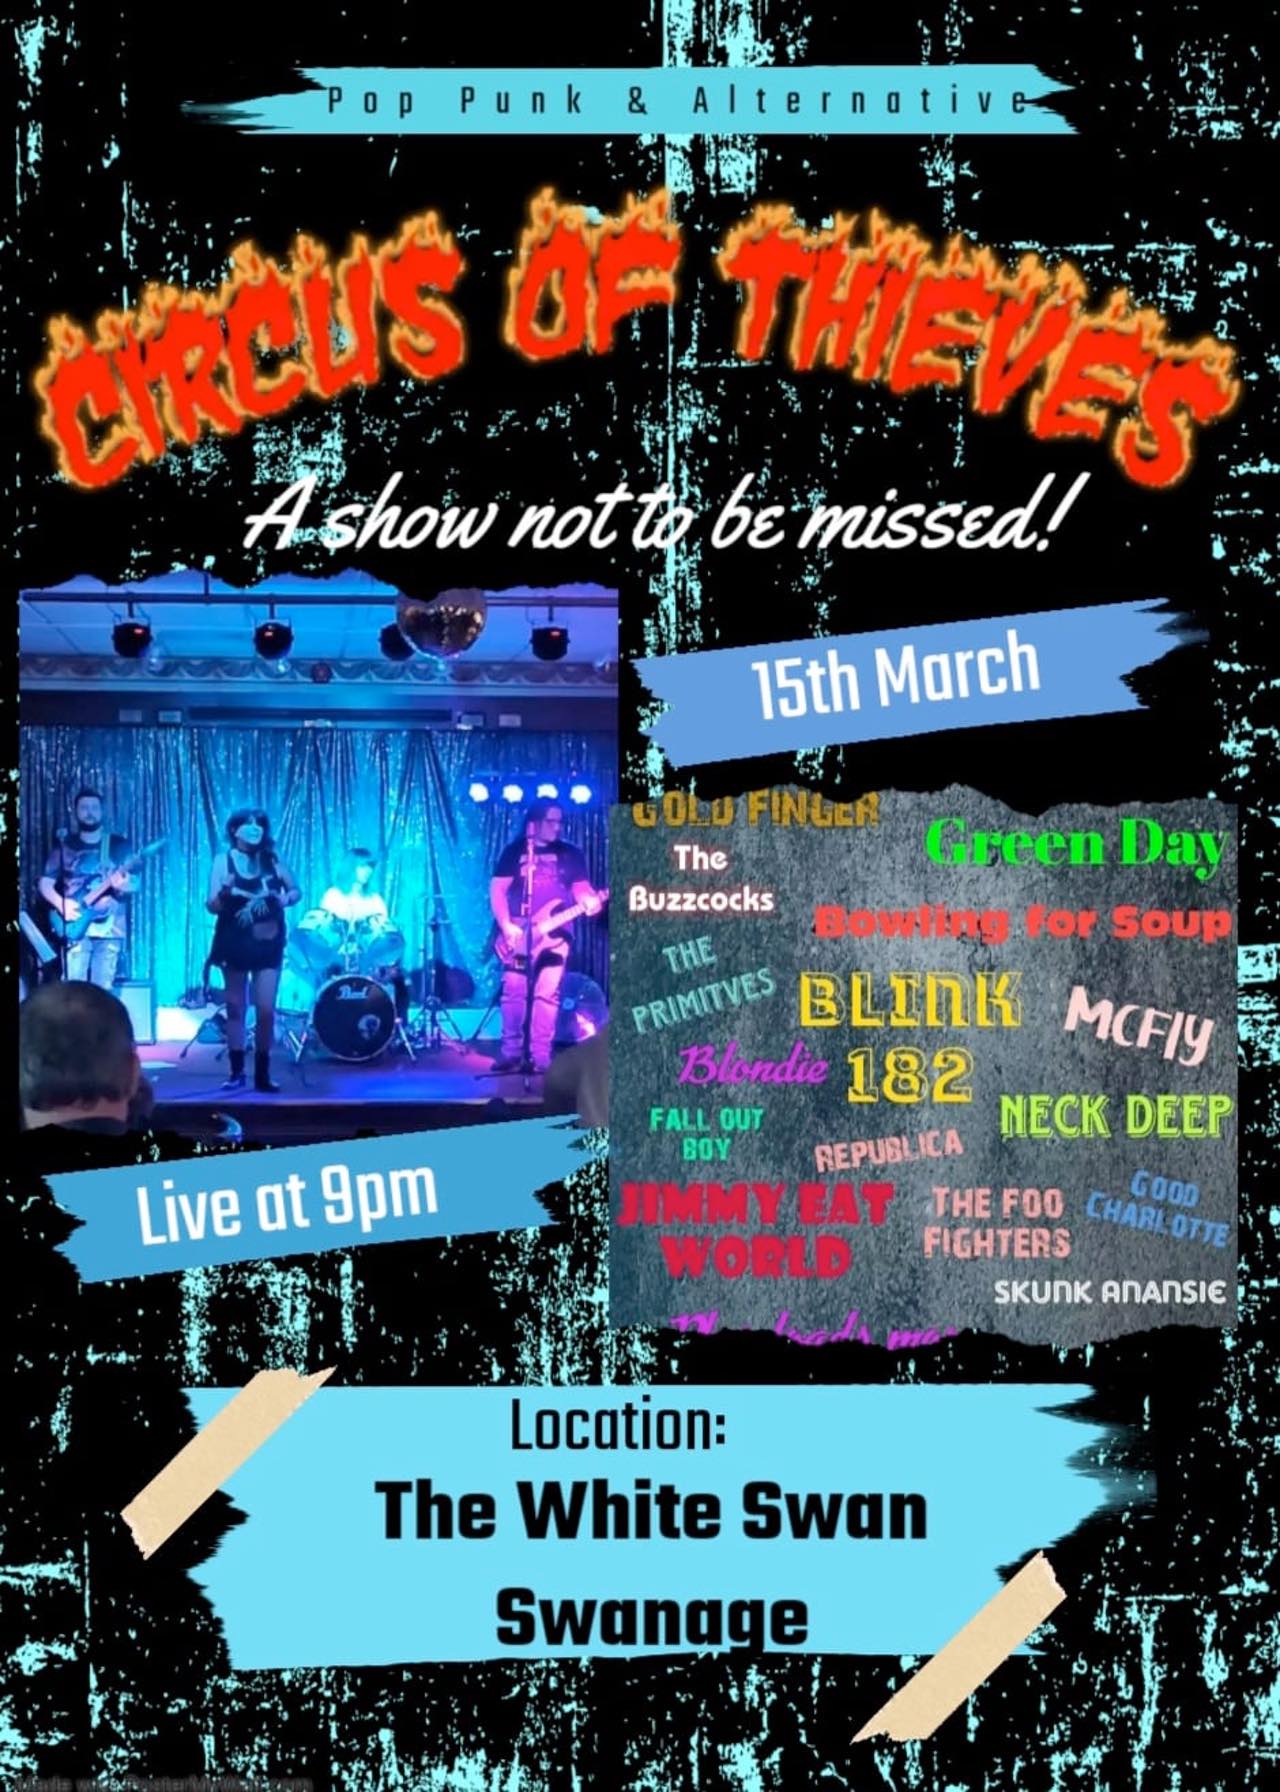 Circus Of Thieves at The White Swanage